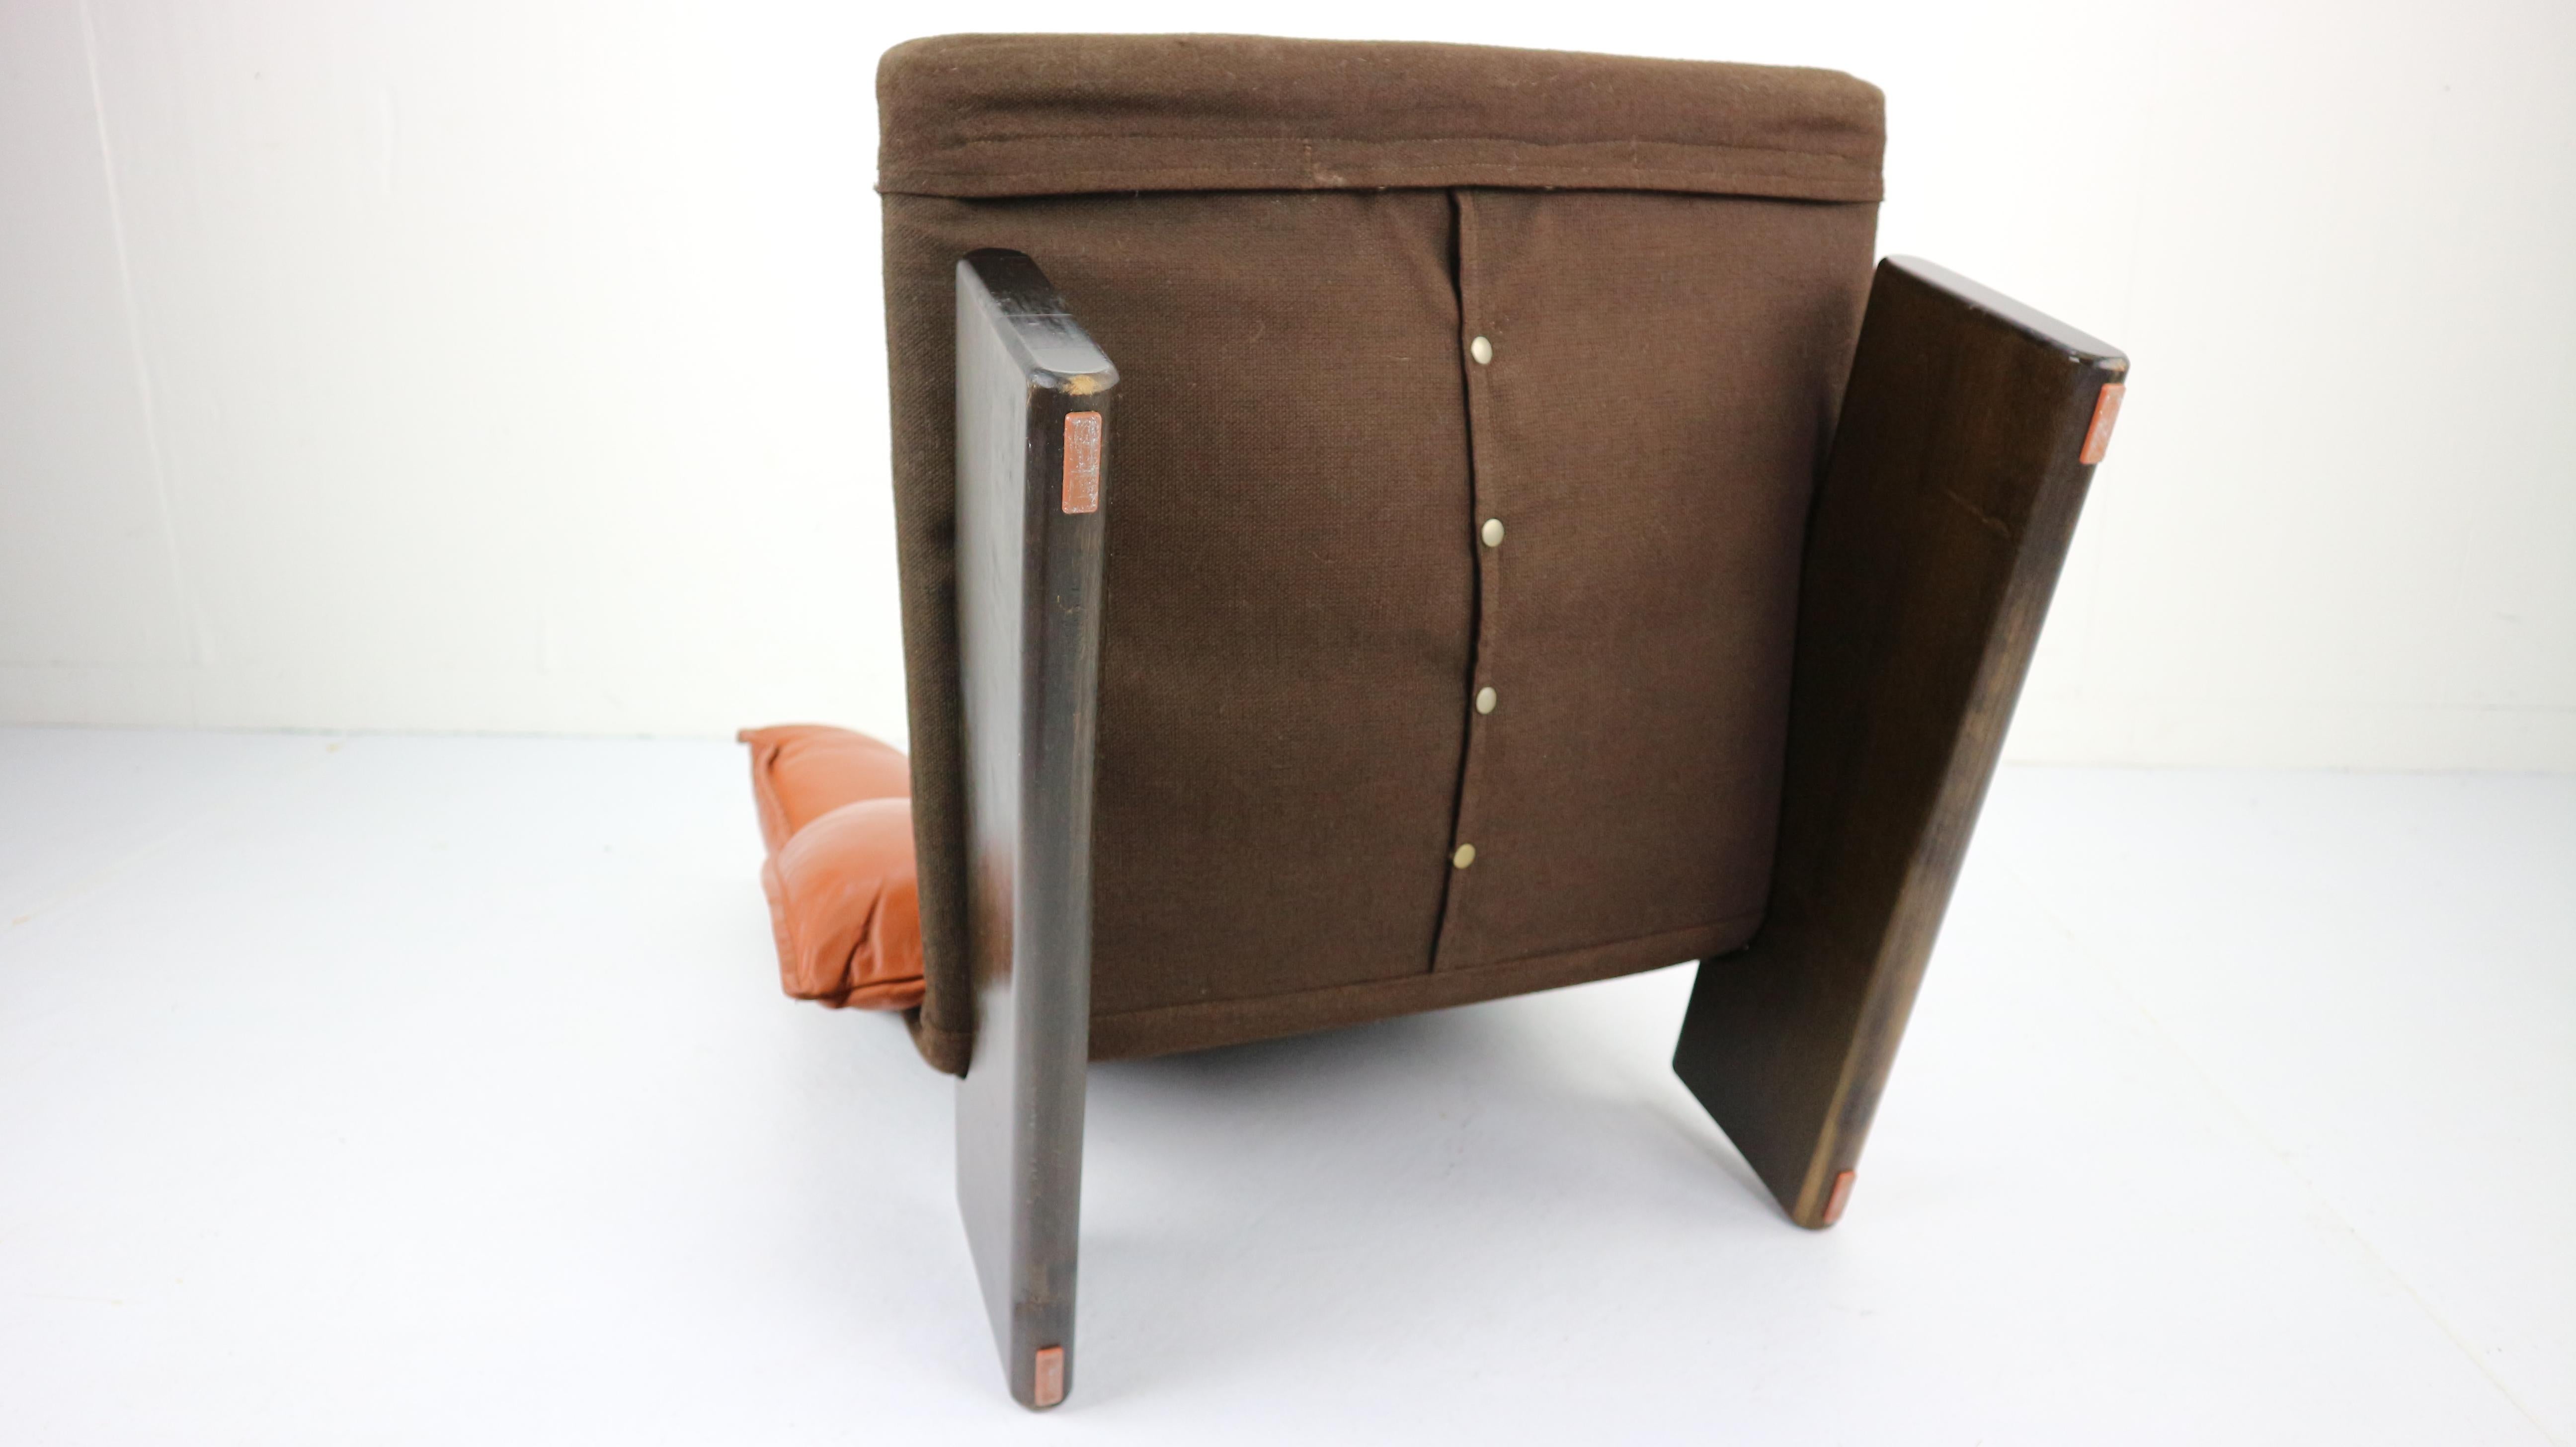 Cognac Leather and Wood Lounge Chair, Dutch Modern Design, 1970s 5